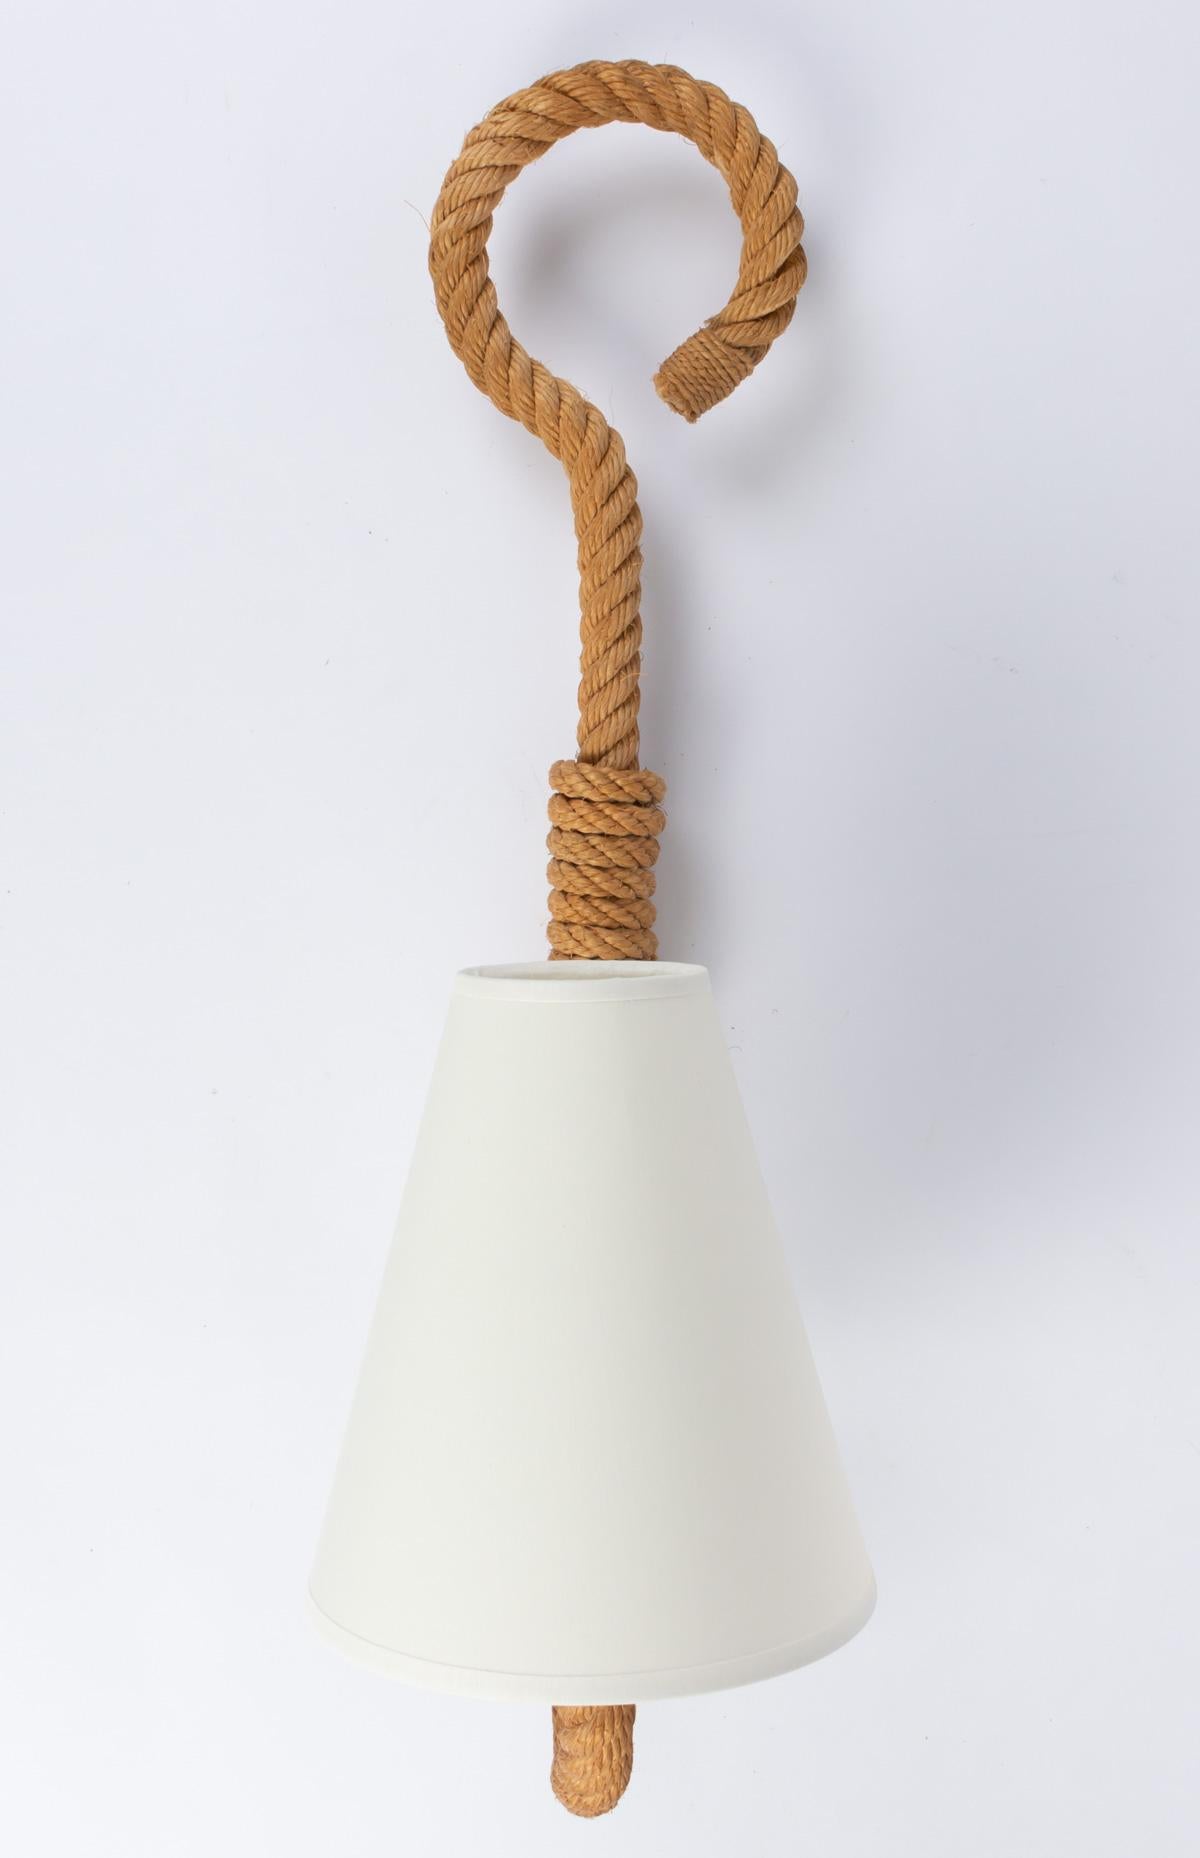 Each wall light consists of a weaved rope arm. They end with a loop open on their upper parts. The curved arm supports an off-white cotton lampshade, identical to the originals. One bulb per wall light.

Adrien Audoux and Frida Minet are known for